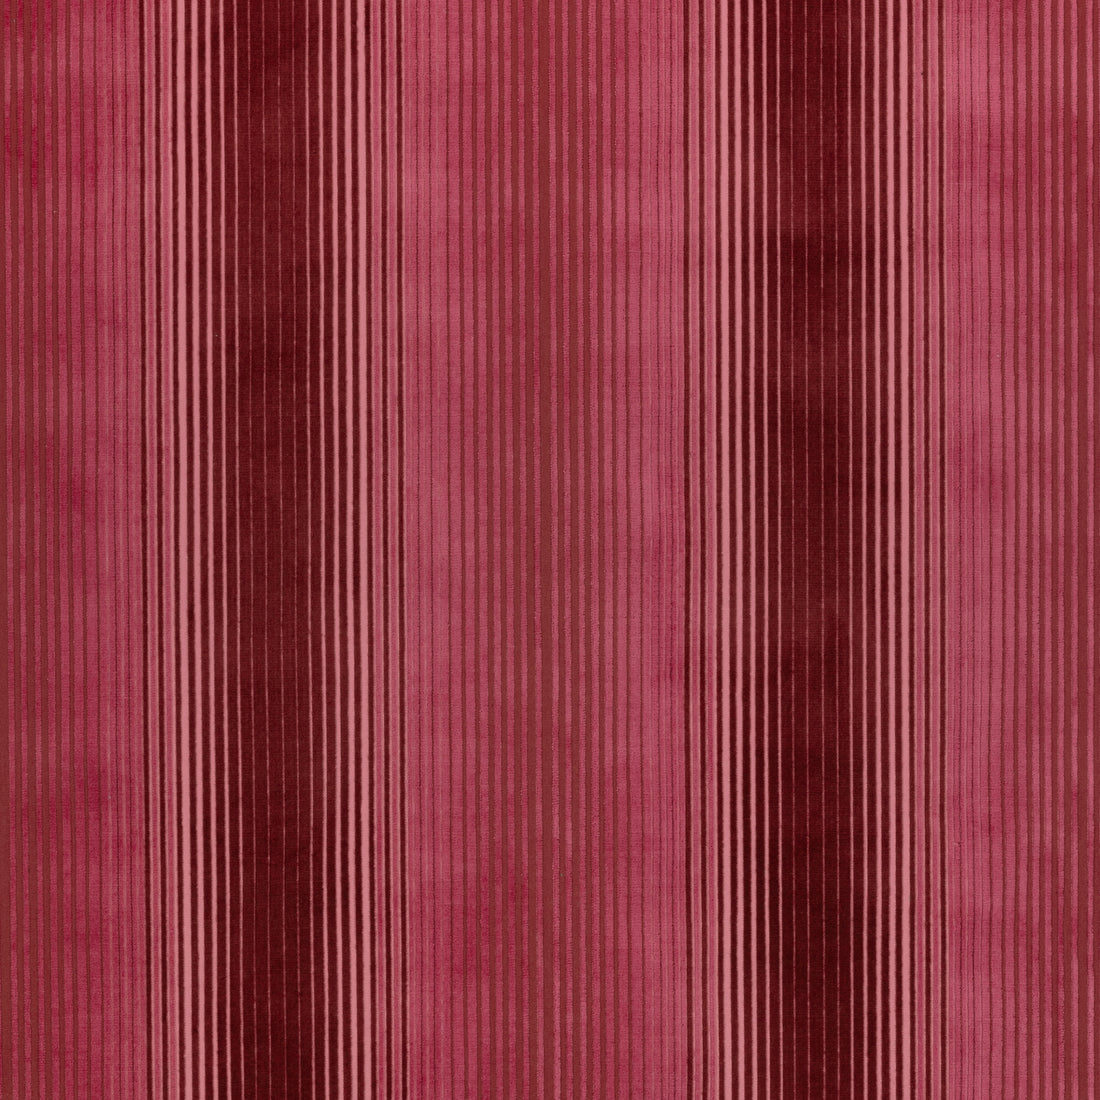 Ombre Velvet fabric in cranberry  color - pattern number AW9667 - by Anna French in the Savoy collection